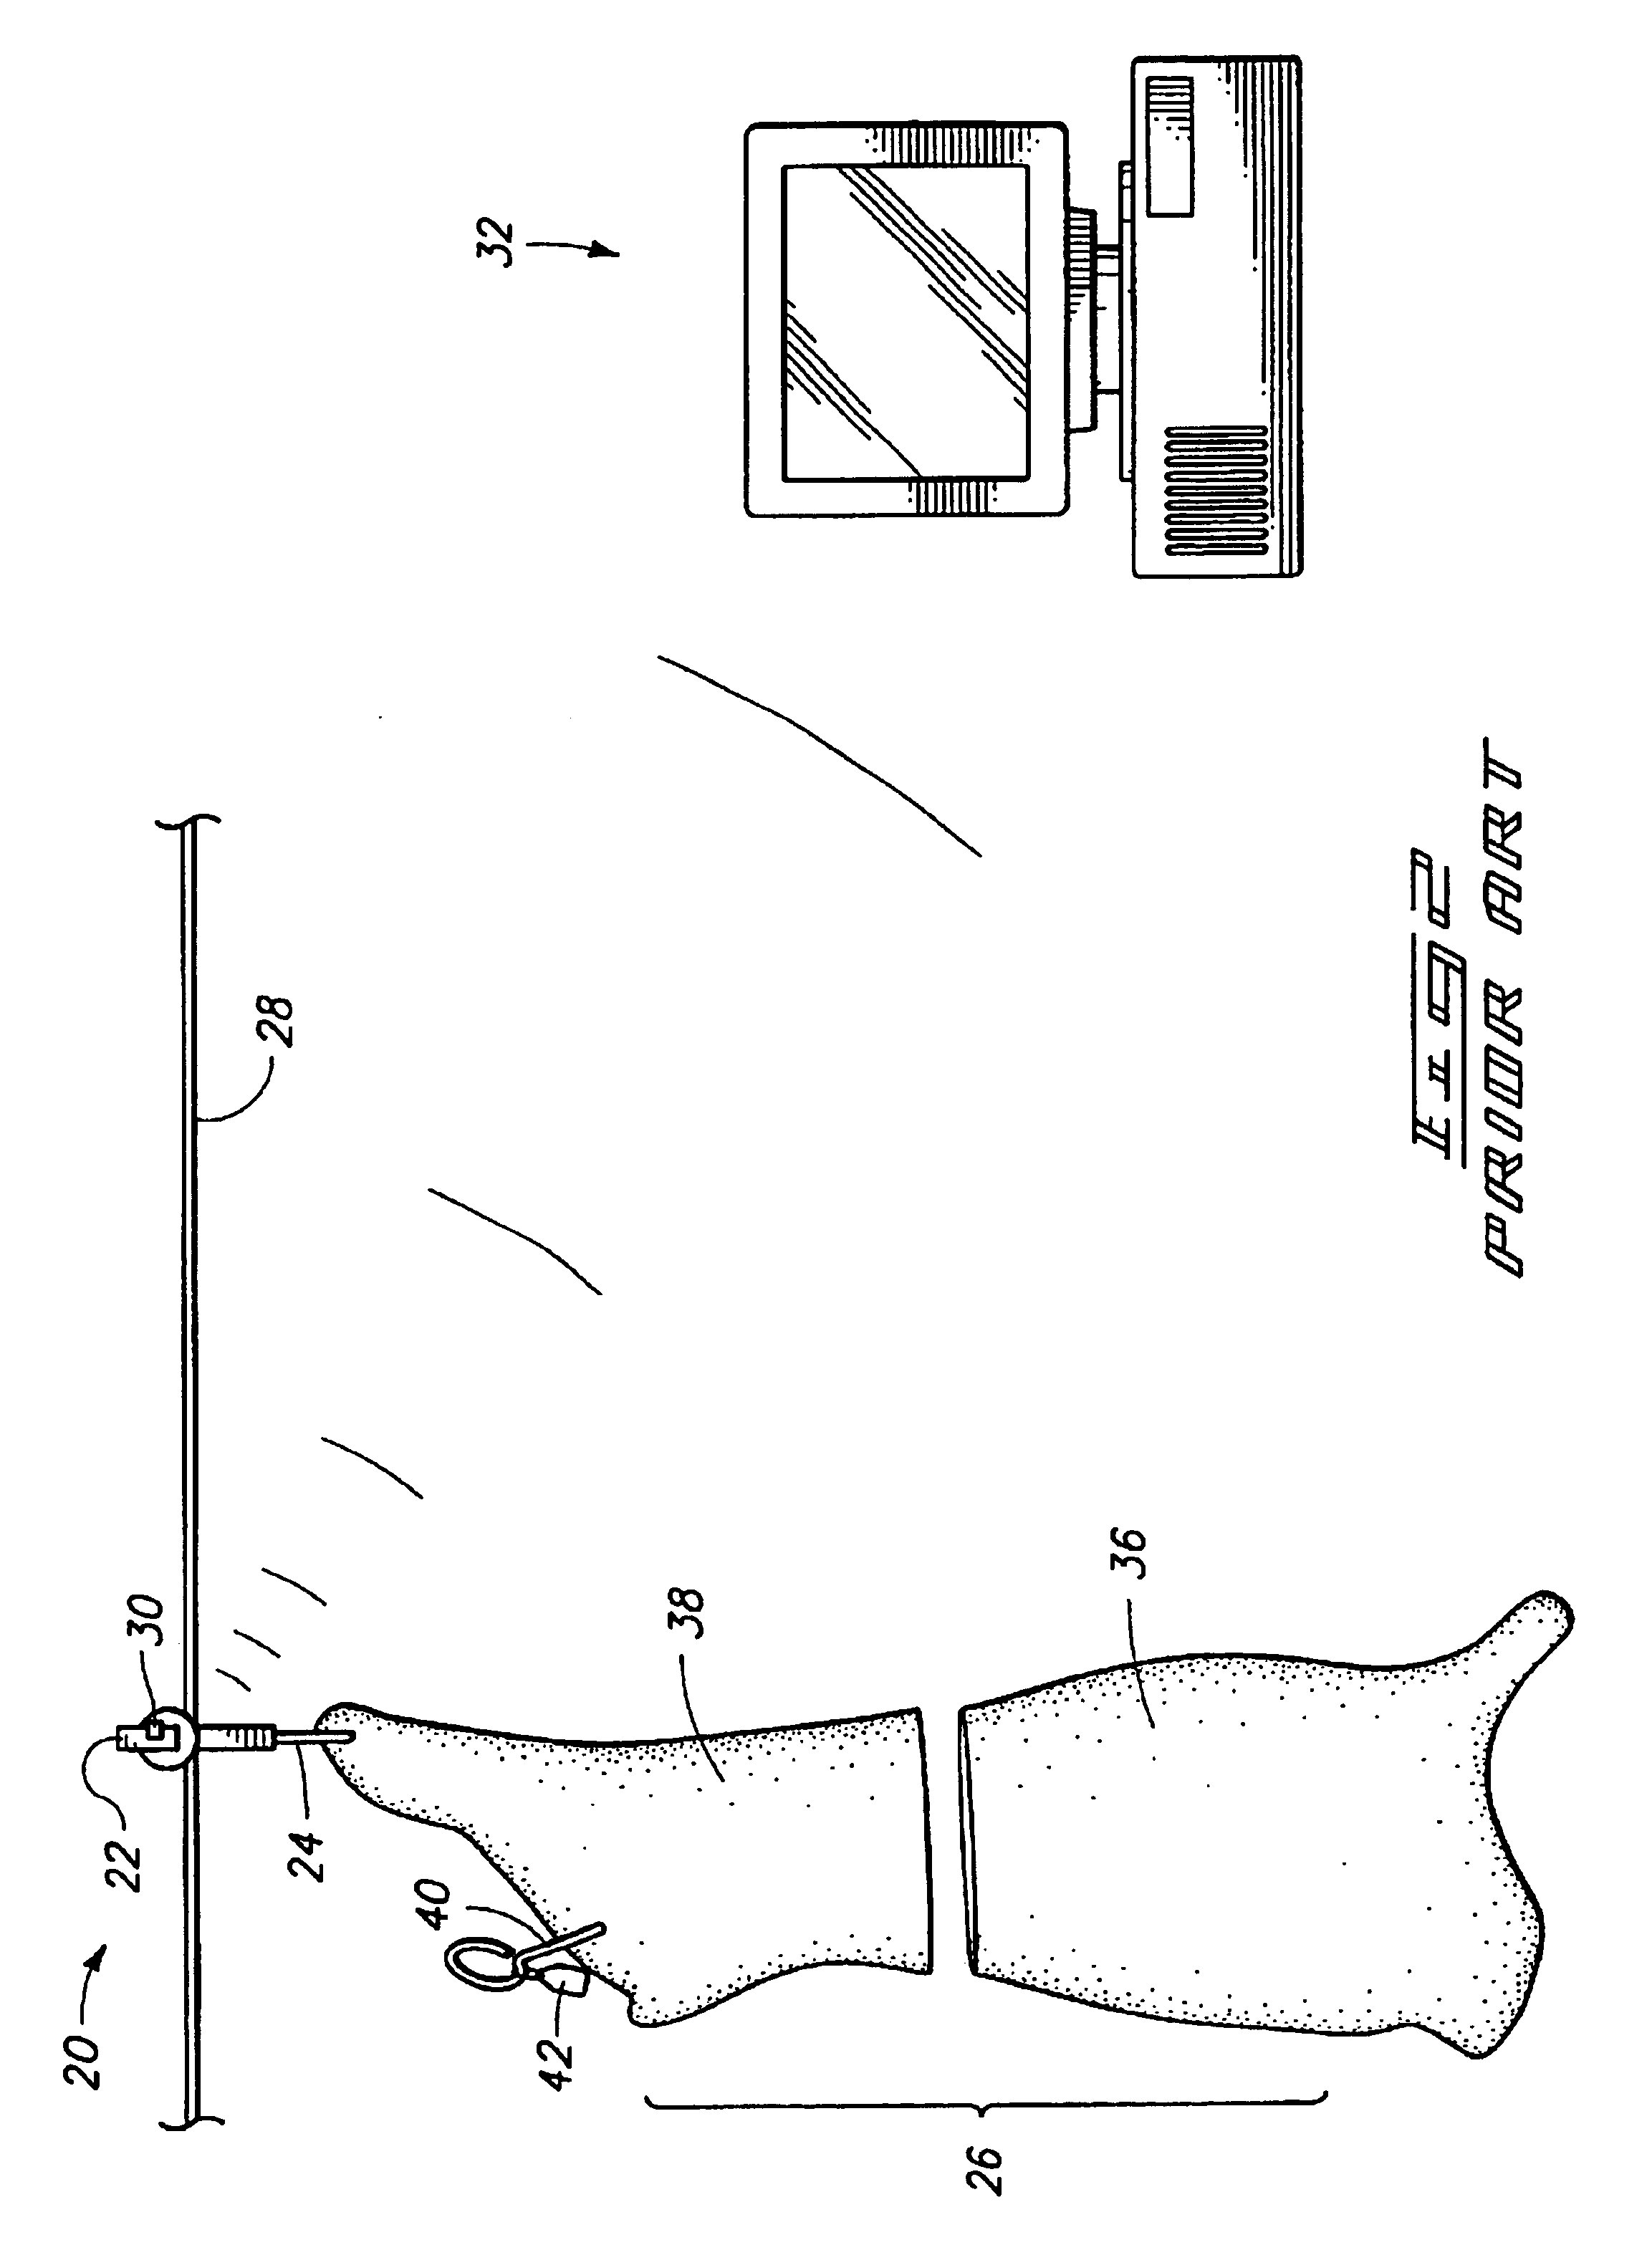 System and method for electronic tracking of units associated with a batch